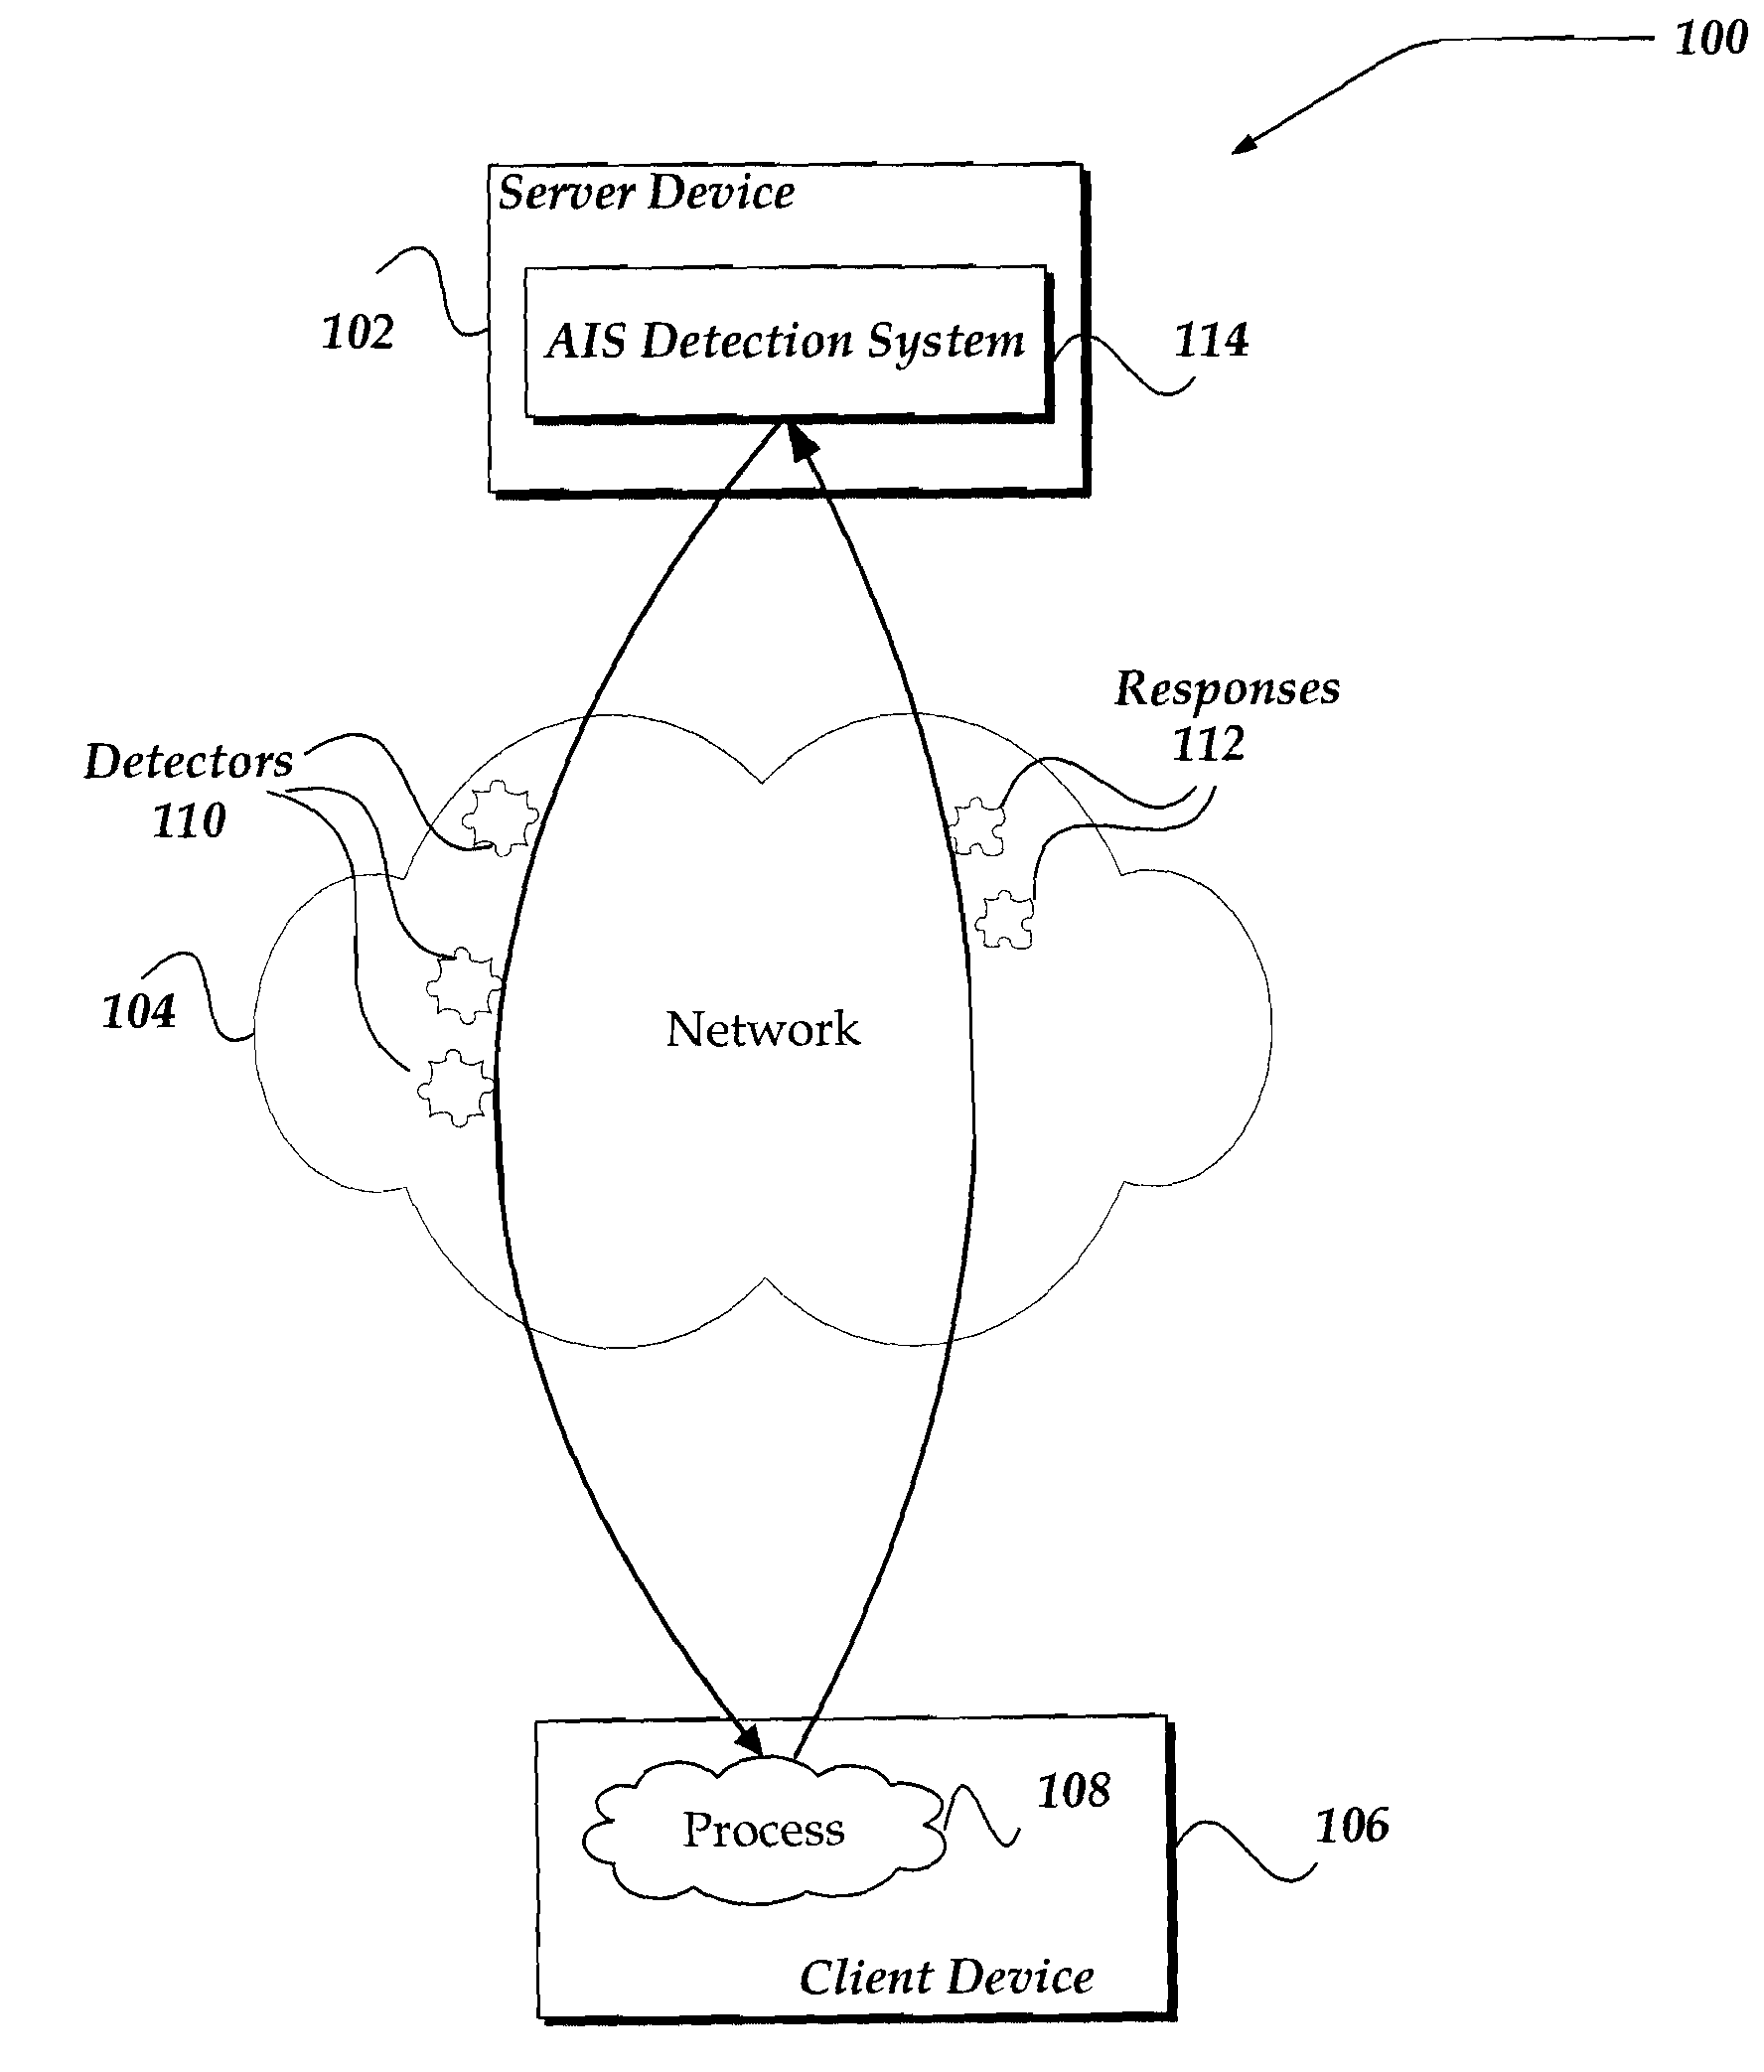 Method for evolving detectors to detect malign behavior in an artificial immune system